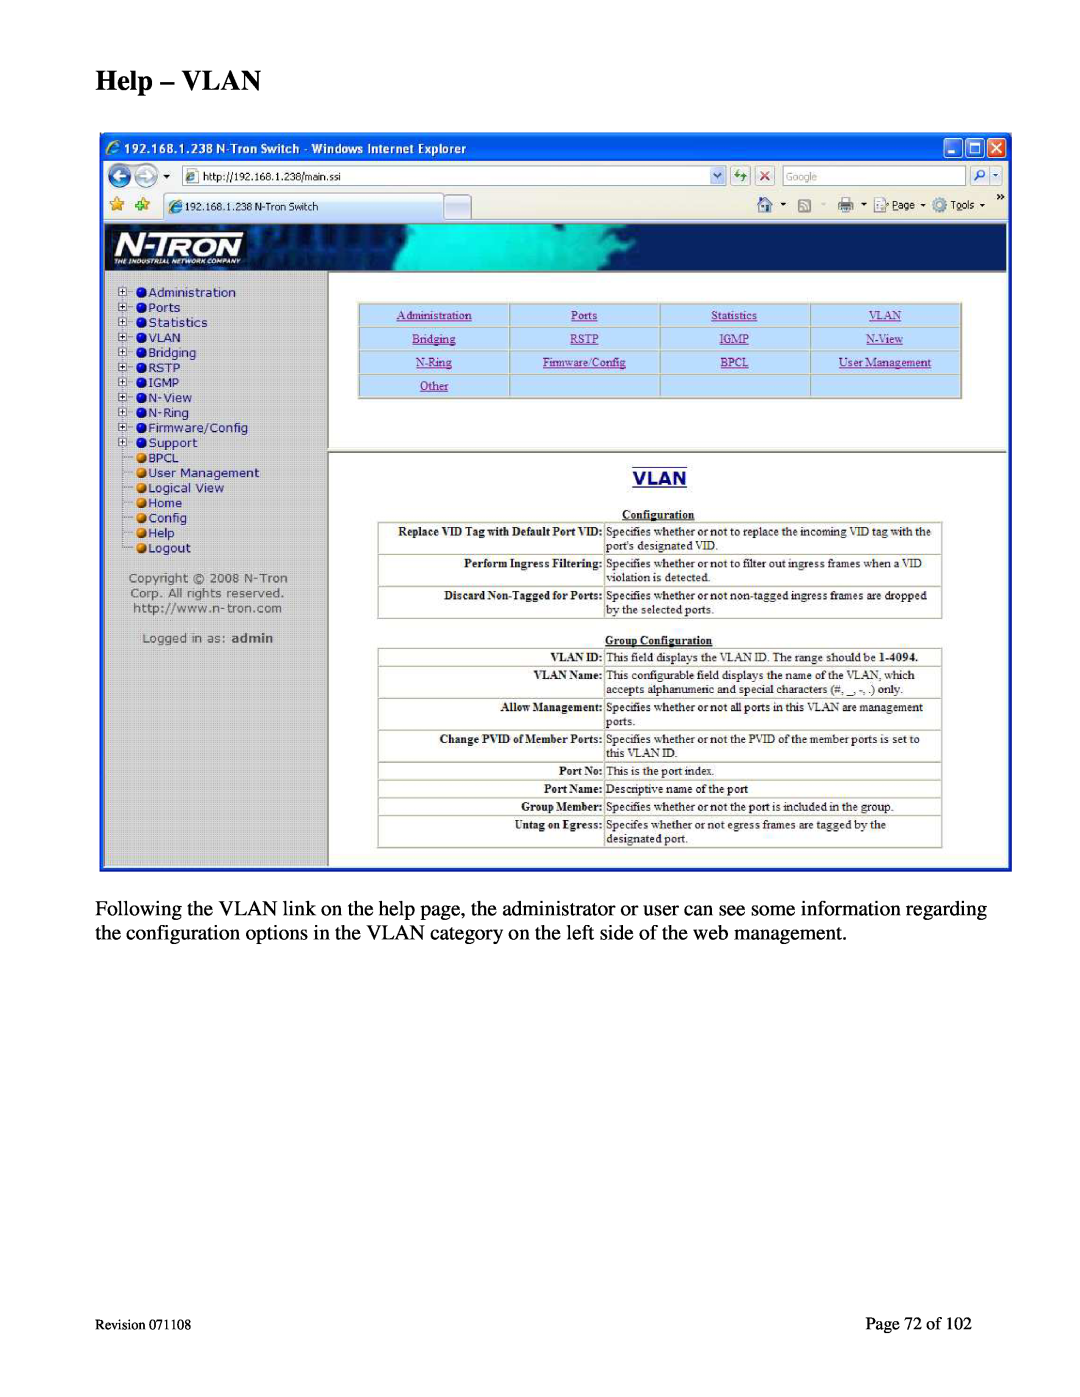 N-Tron 708M12 user manual Help - VLAN, Page 72 of, Revision 